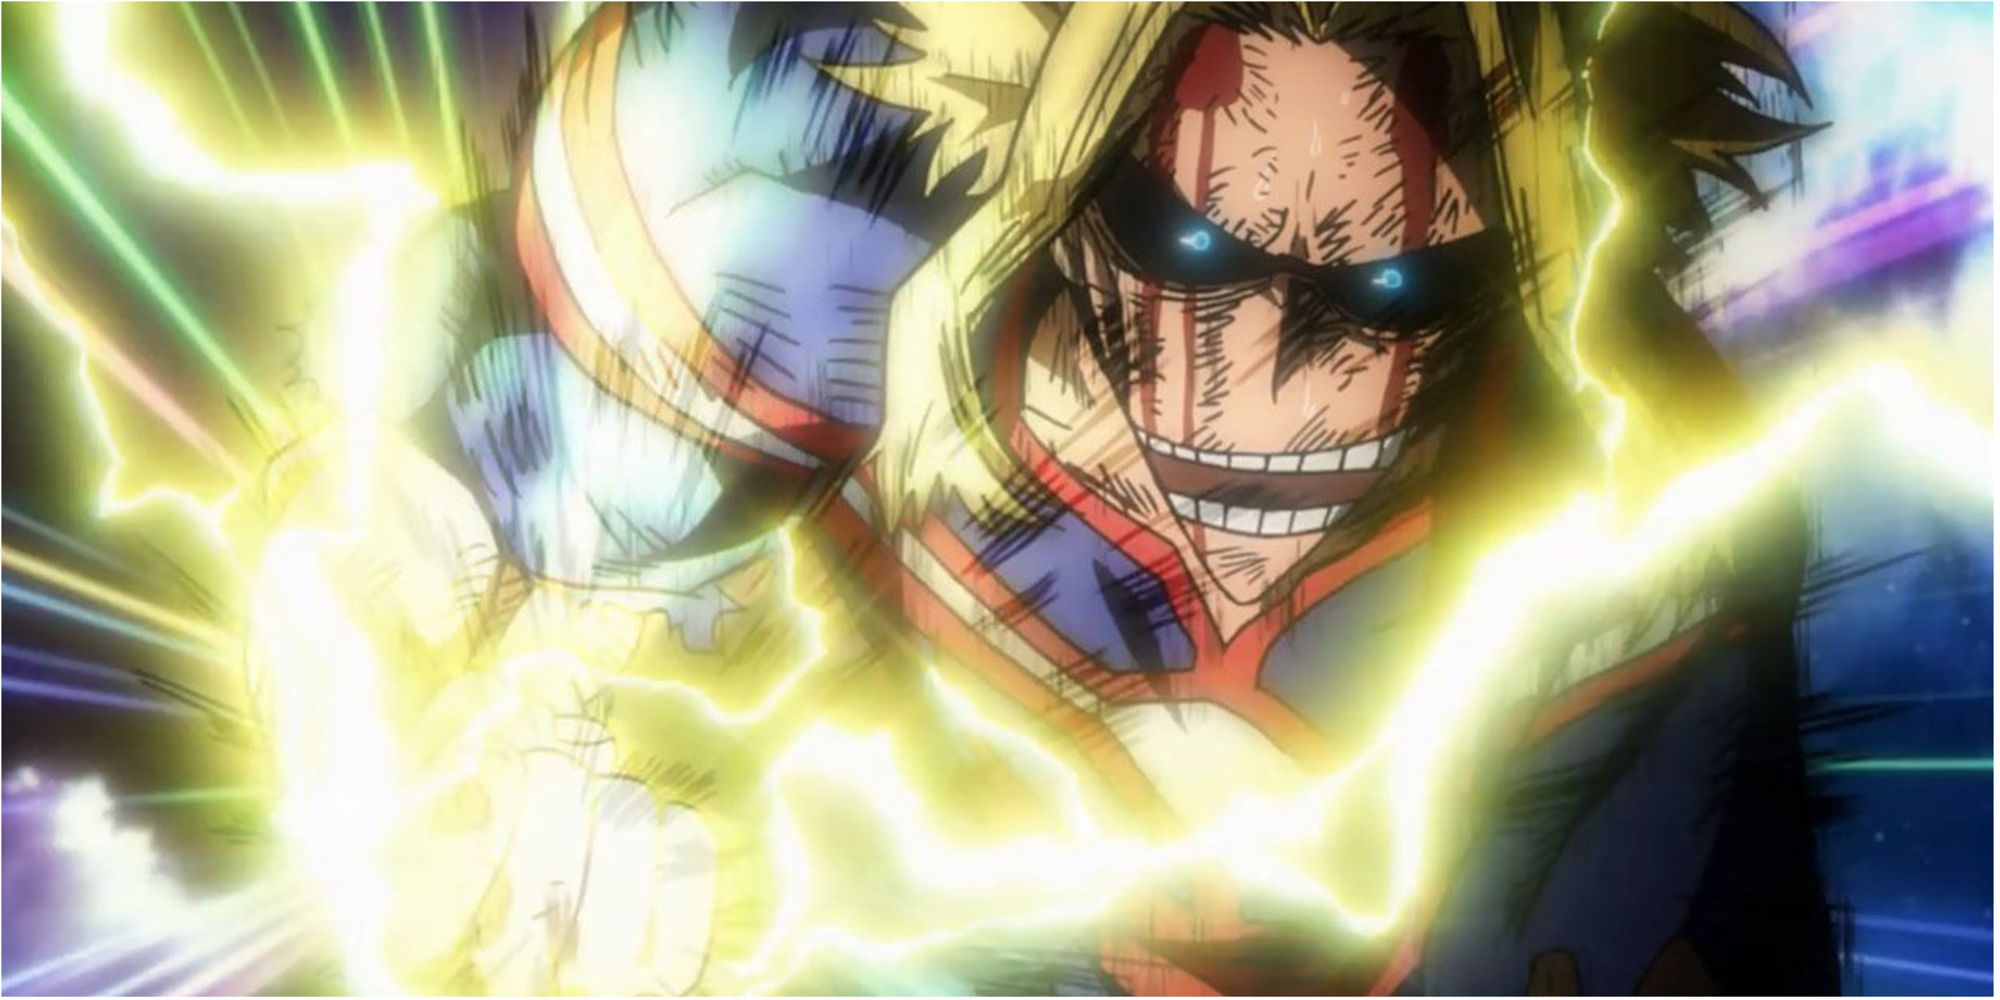 All Might wages war with All For One in My Hero Academia.